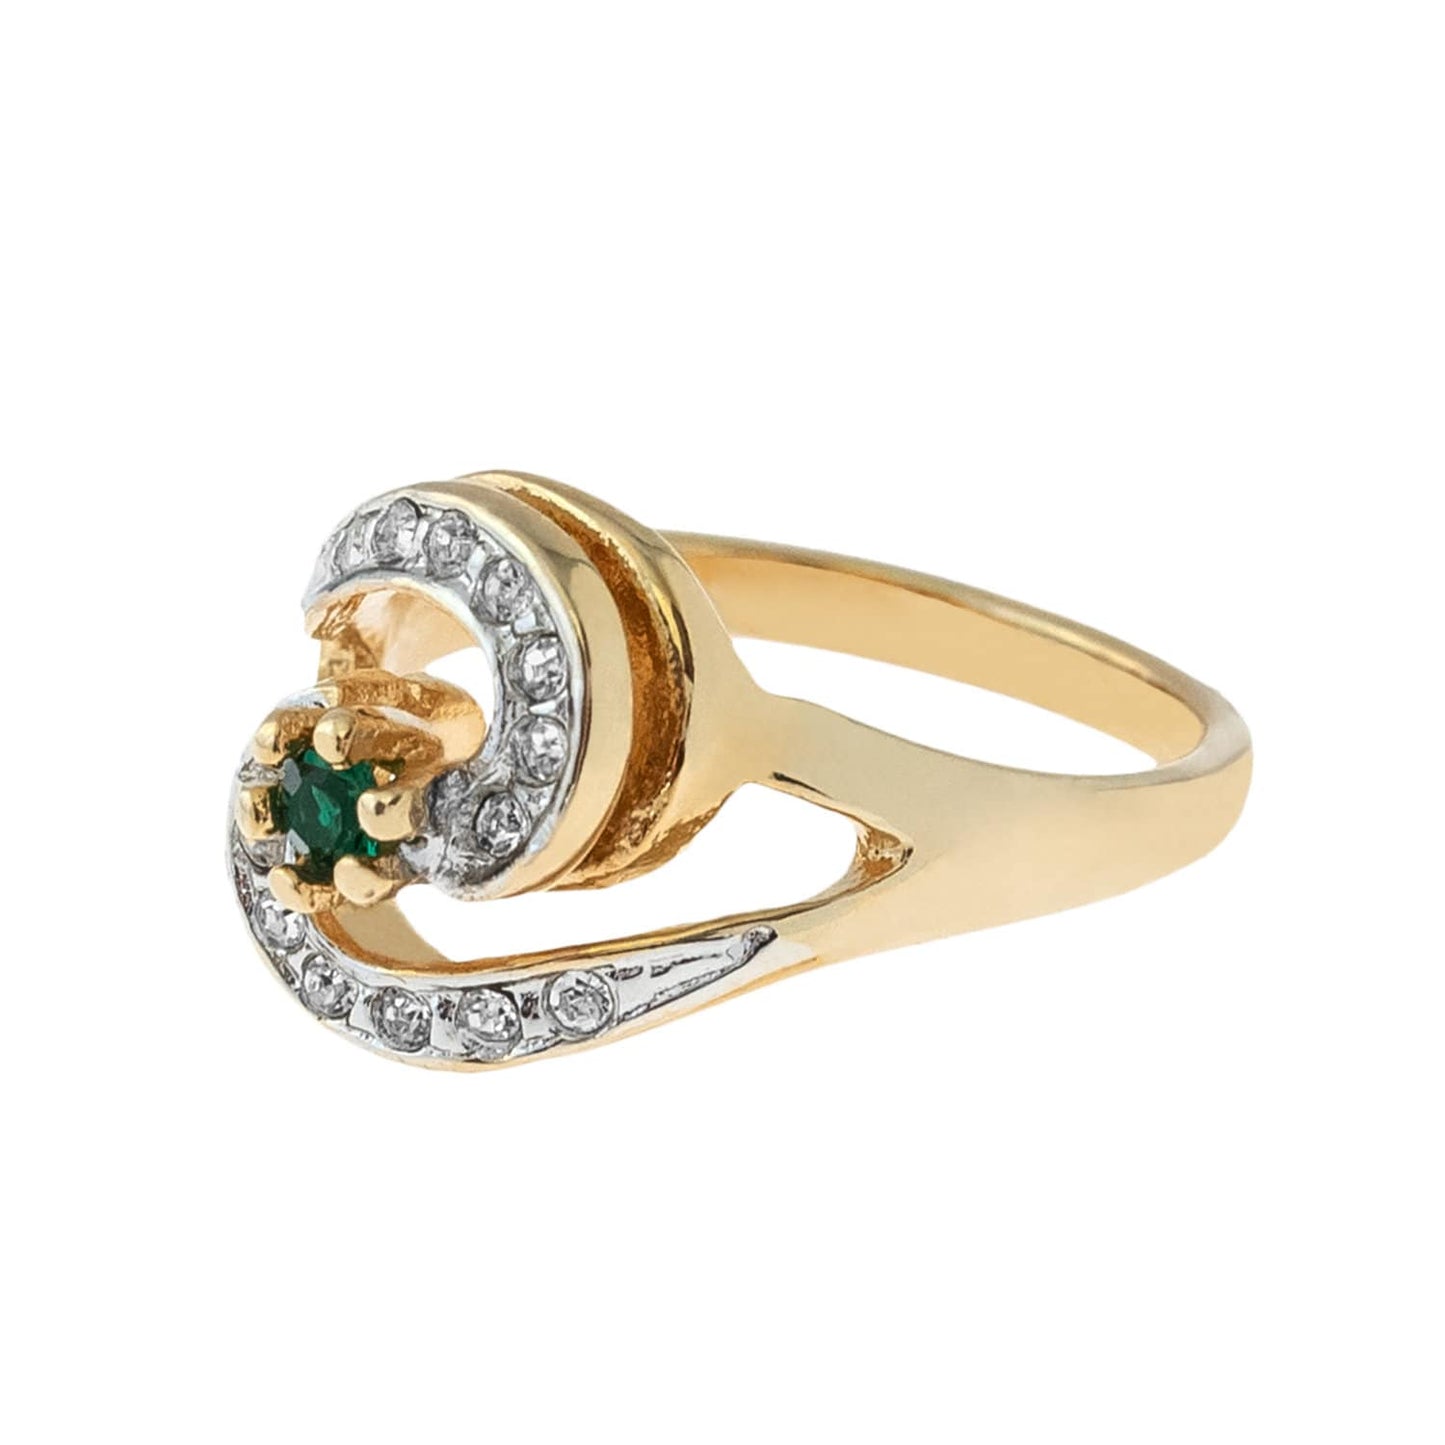 Vintage Ring Emerald Cubic Zirconia 18k Gold Plated Ring with Clear Swarovski Crystals #R1081 - Limited Stock - Never Worn